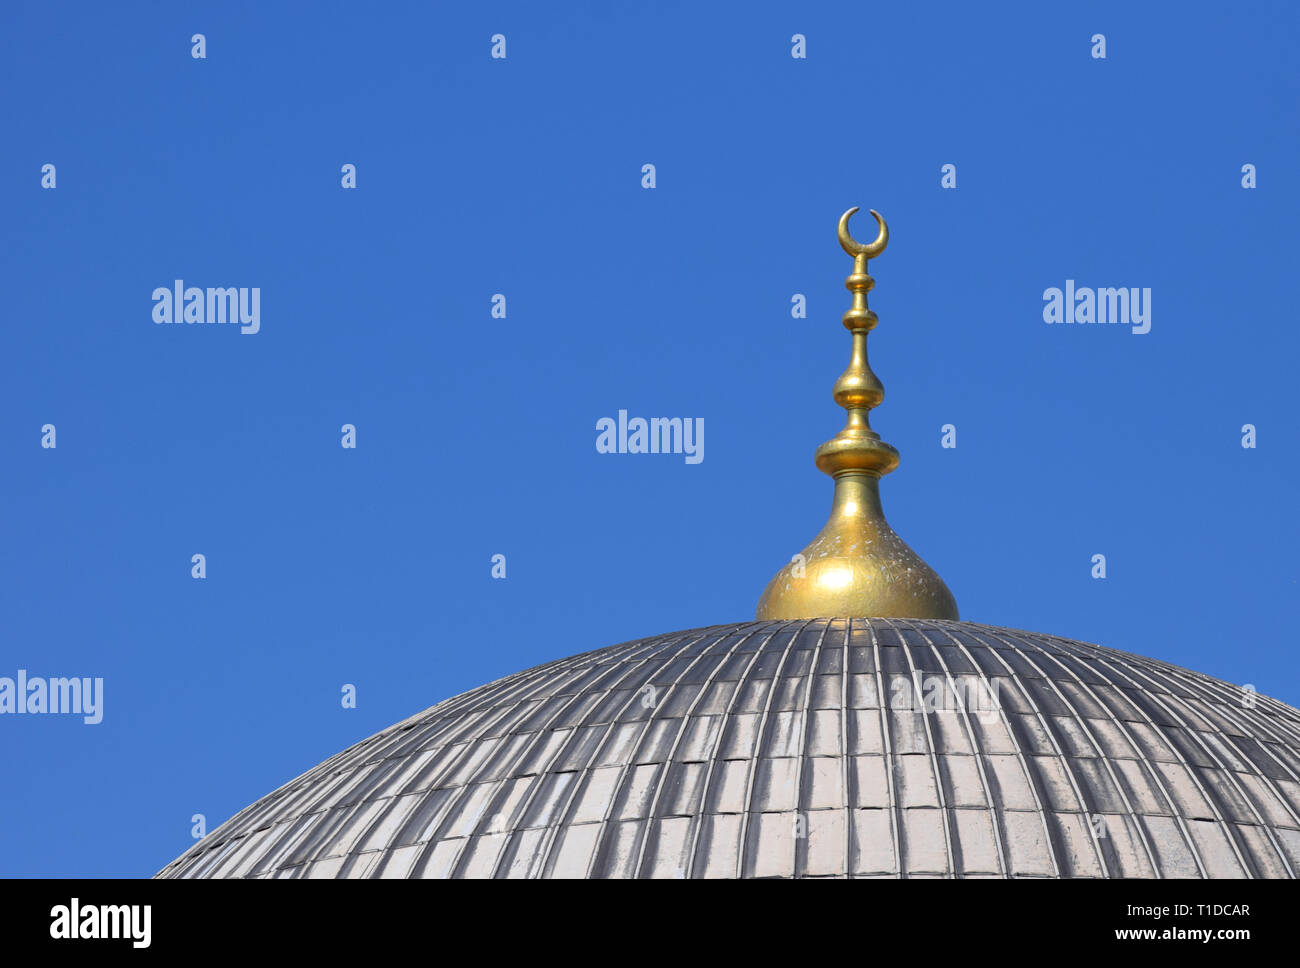 Mosque Dome With Crescent Moon Symbol Against Blue Sky Stock Photo